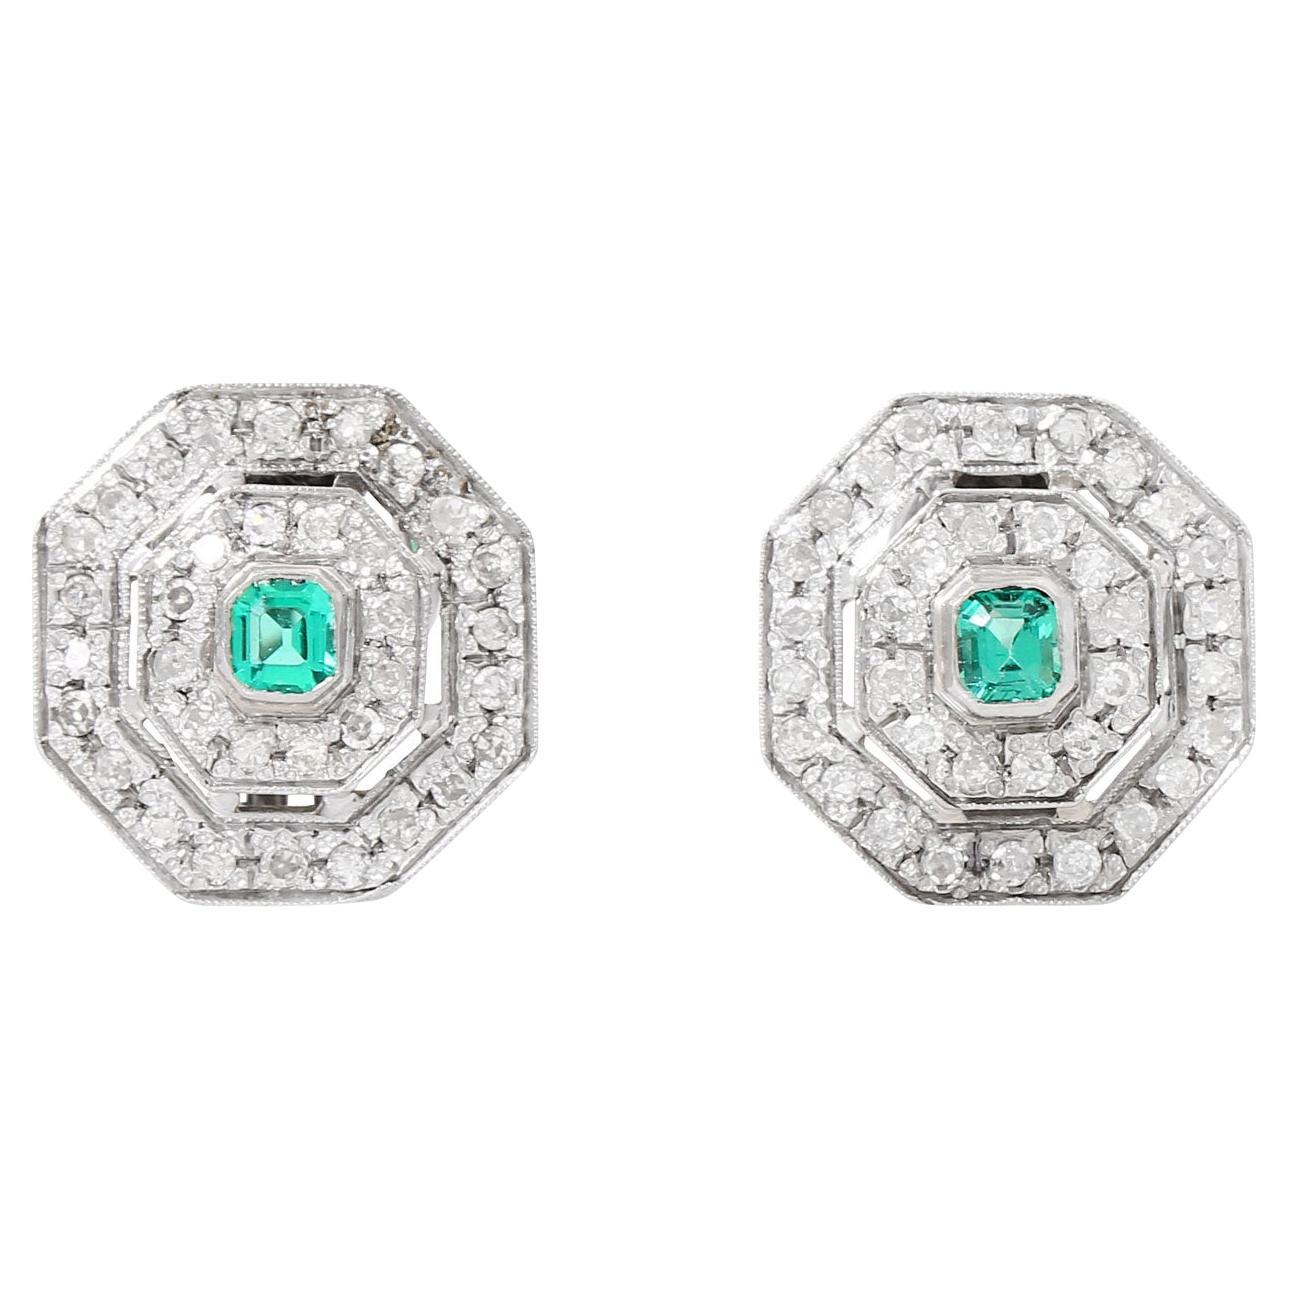 Pair of Clip-On Earrings with 2 Emeralds